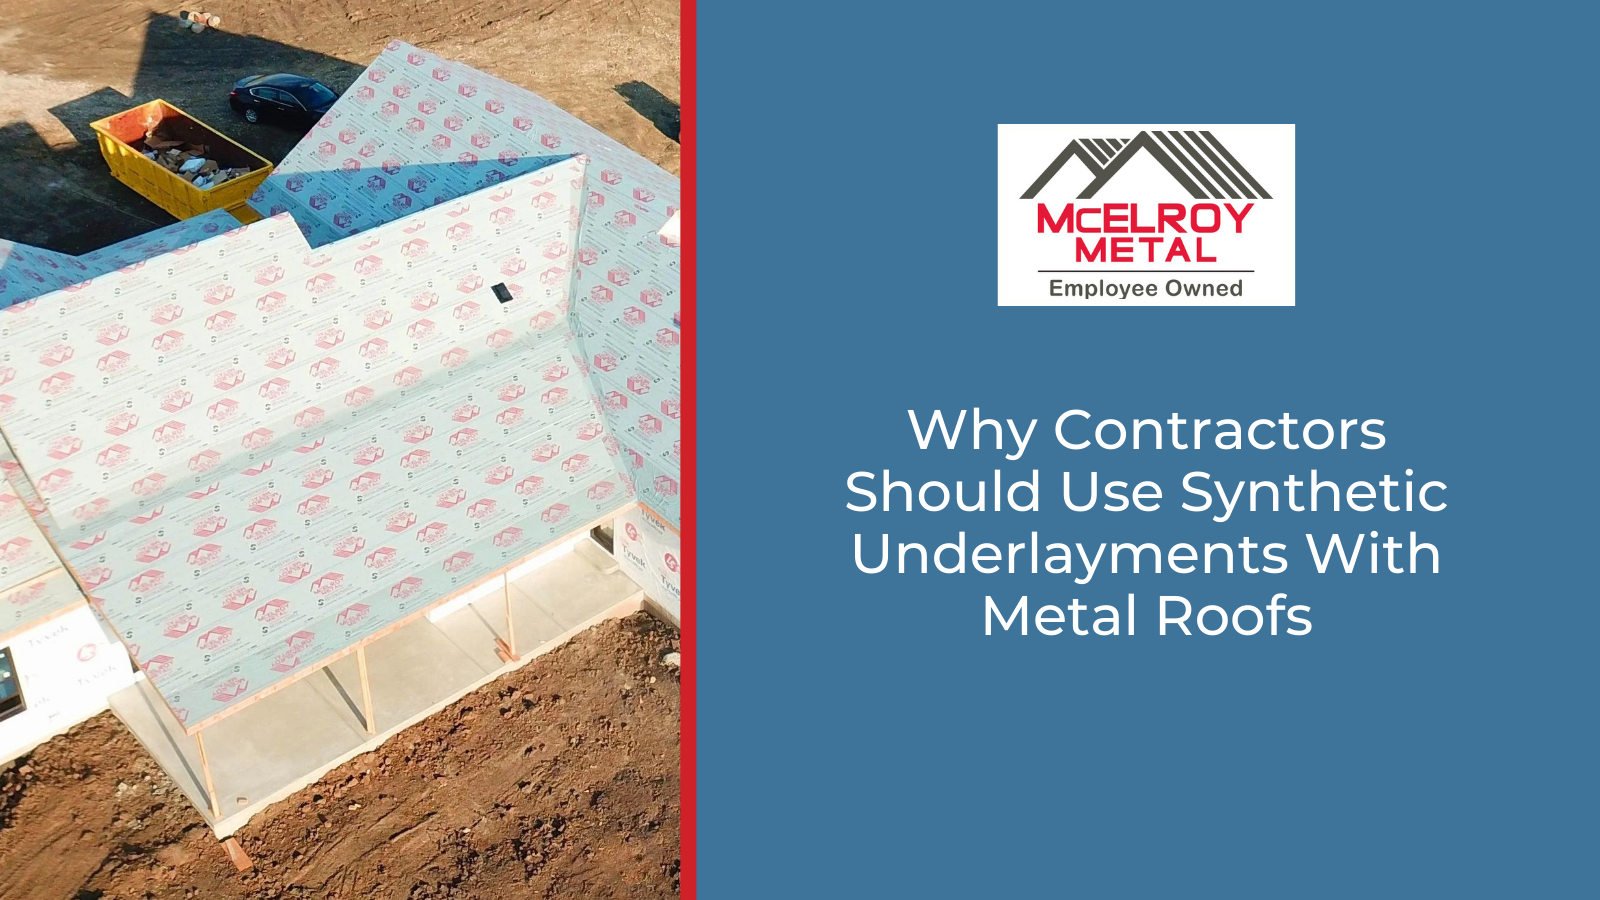 Why Contractors Should Use Synthetic Underlayments With Metal Roofs